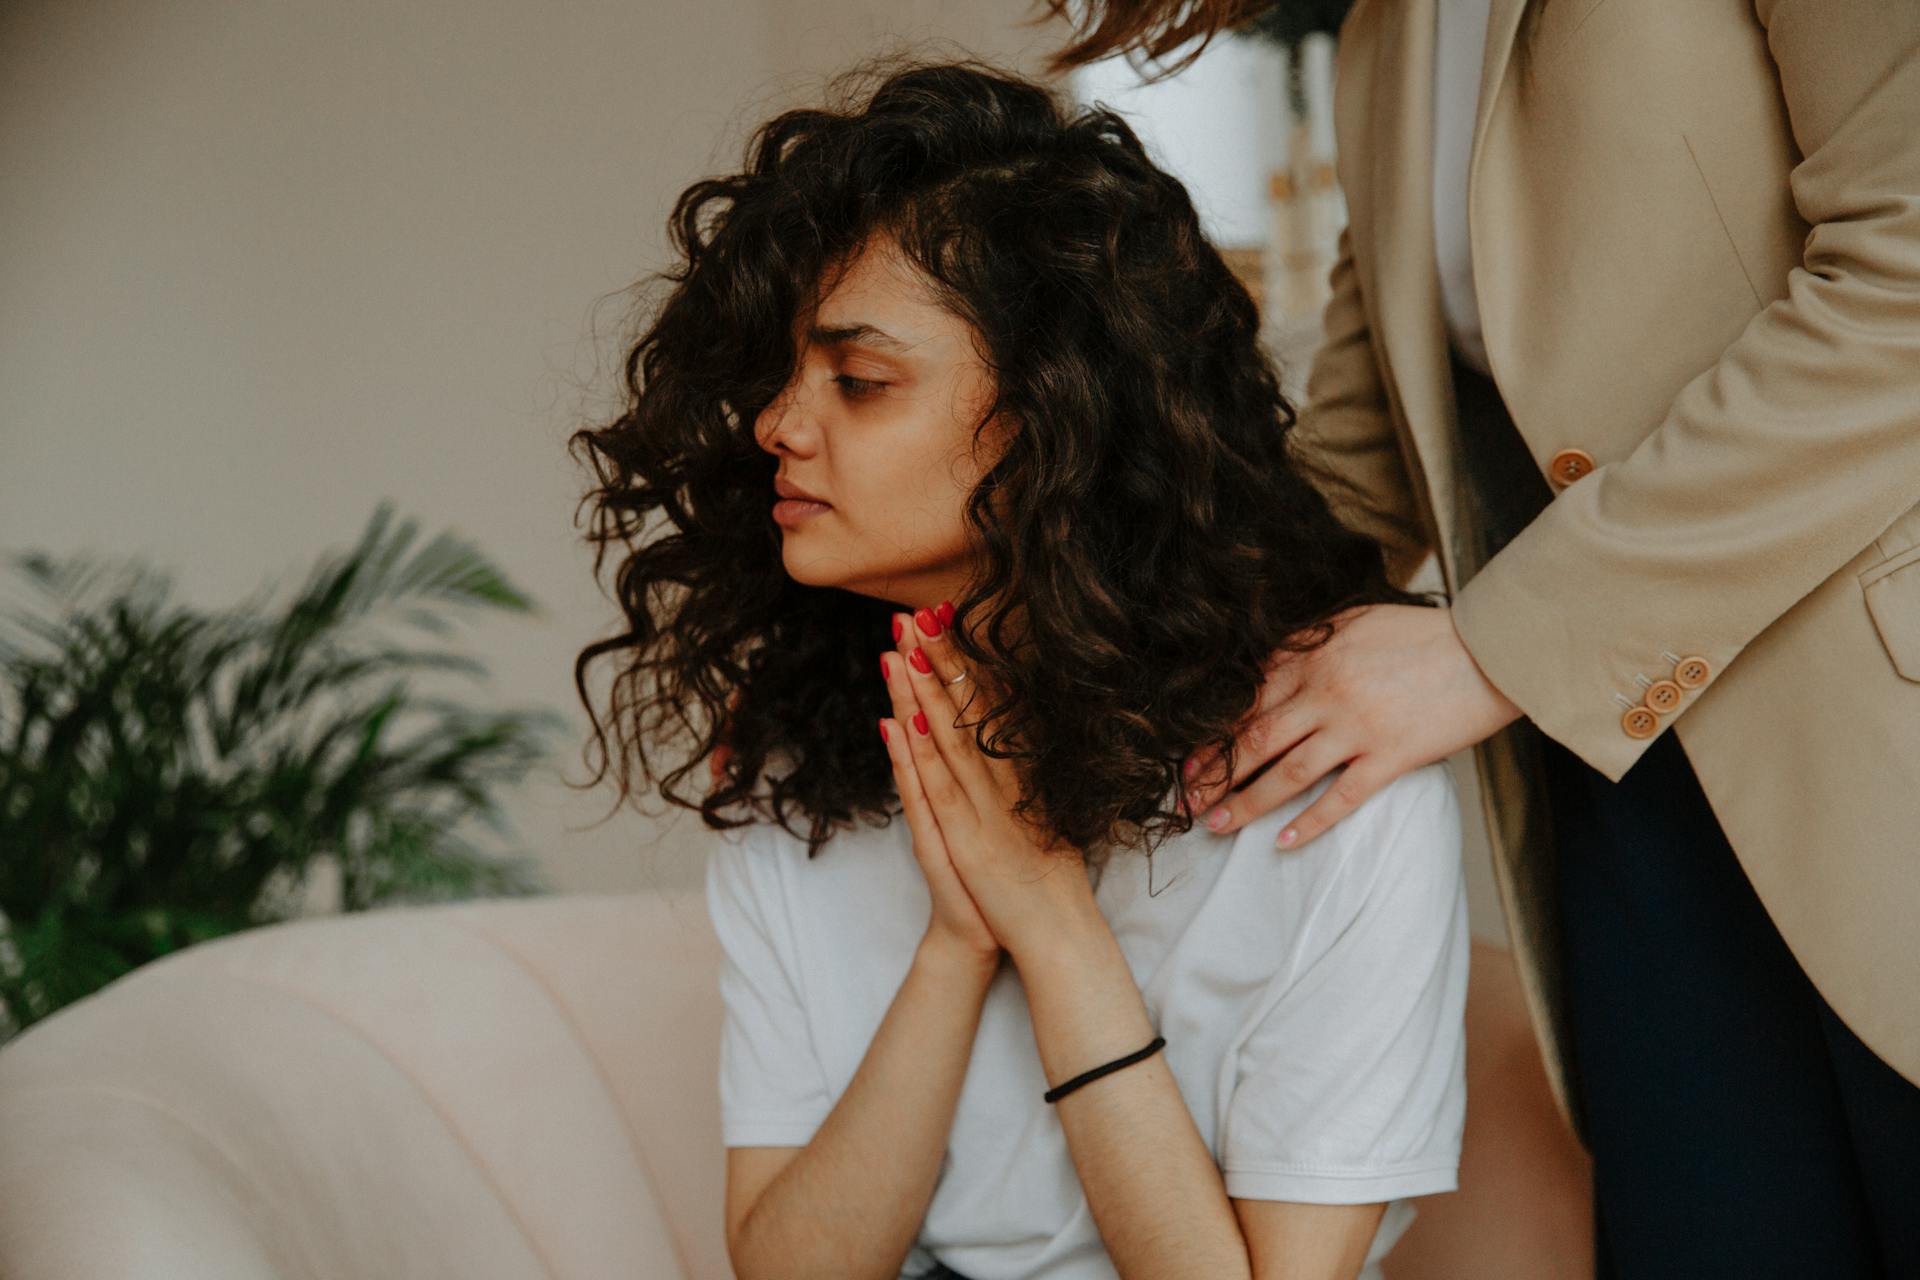 A therapist comforting a patient | Source: Pexels